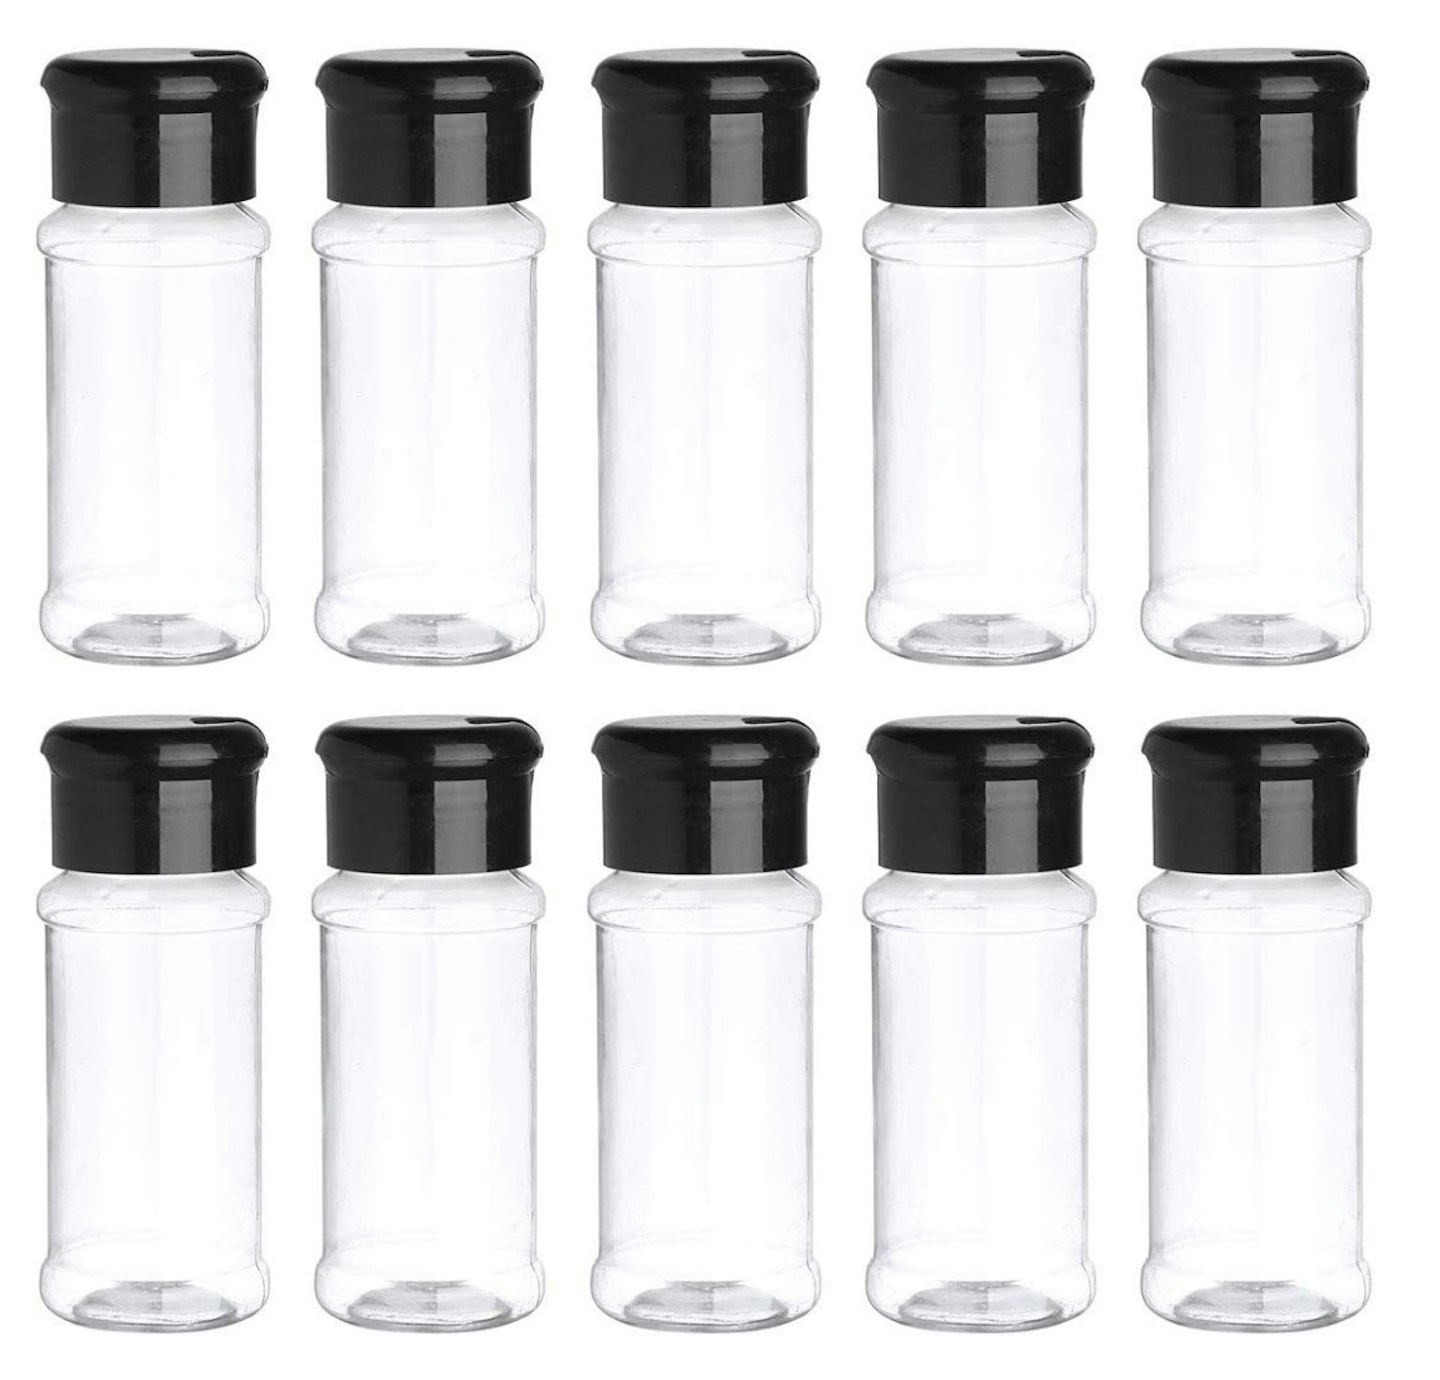 Aislor 10 Pack 100ml Plastic Spice Jars Bottles Containers with Black Cap